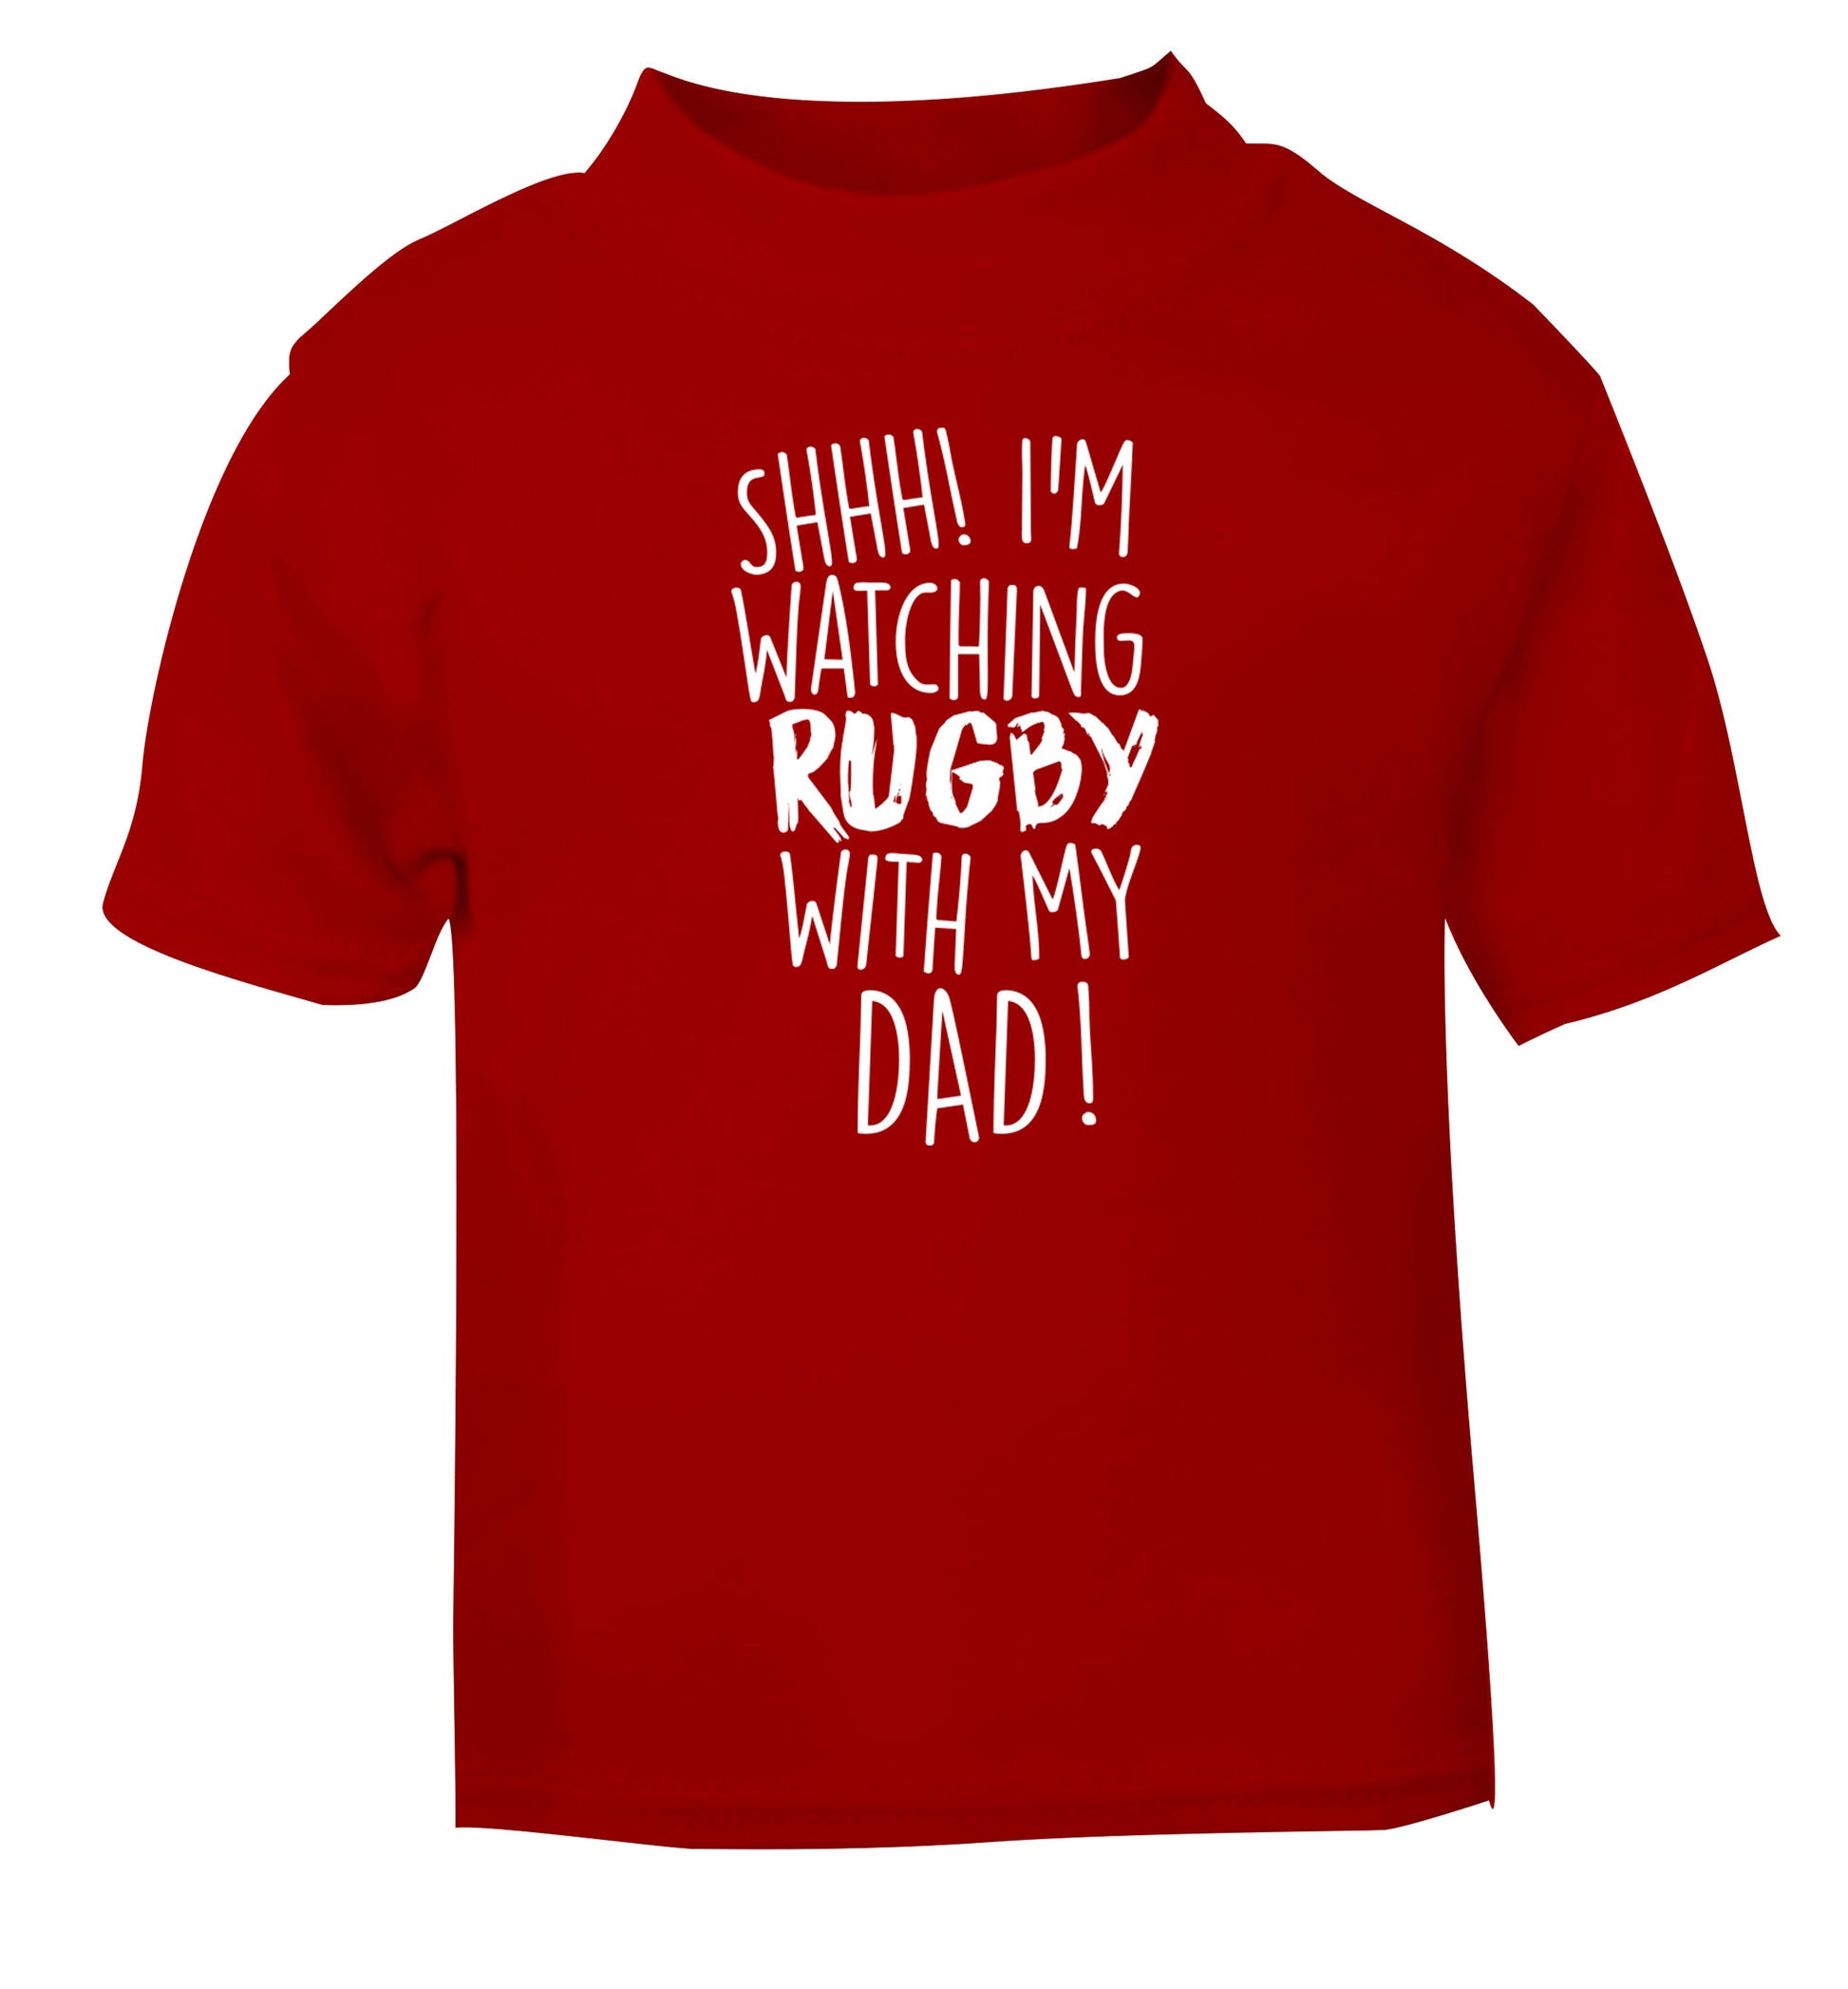 Shh... I'm watching rugby with my dad red Baby Toddler Tshirt 2 Years